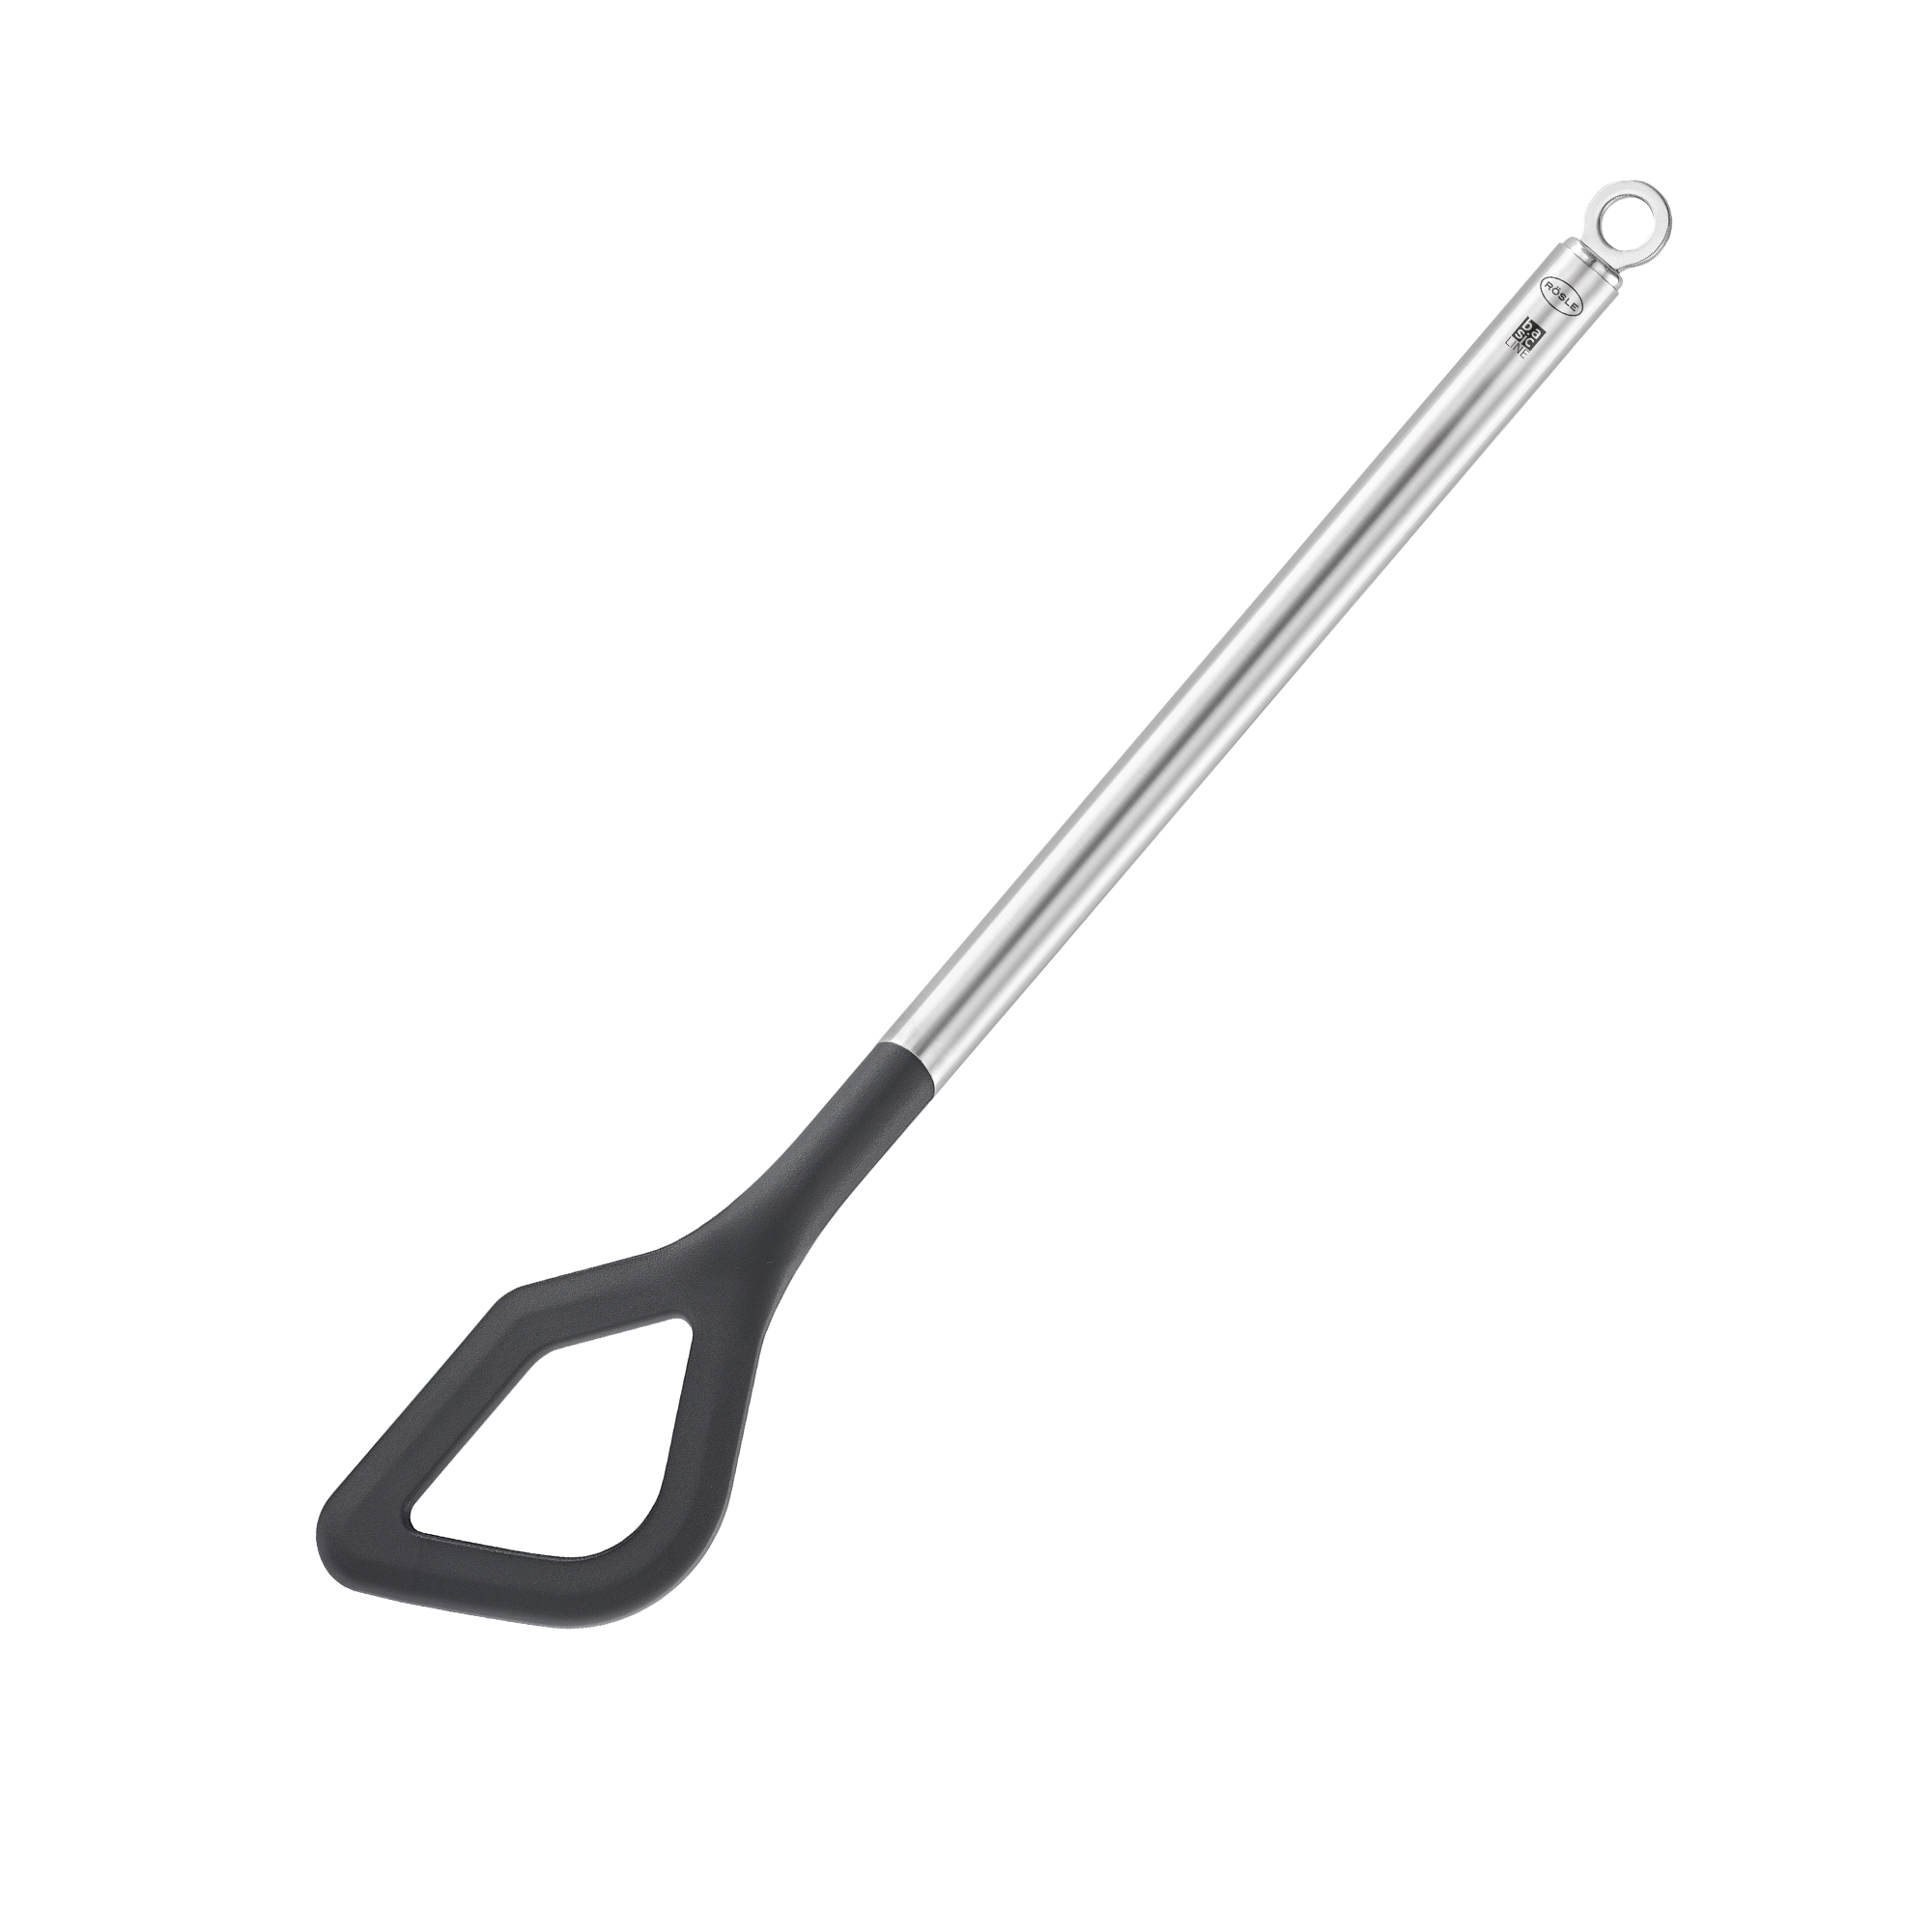 Cooking spoon BASIC LINE 32 cm I 12.5 in.